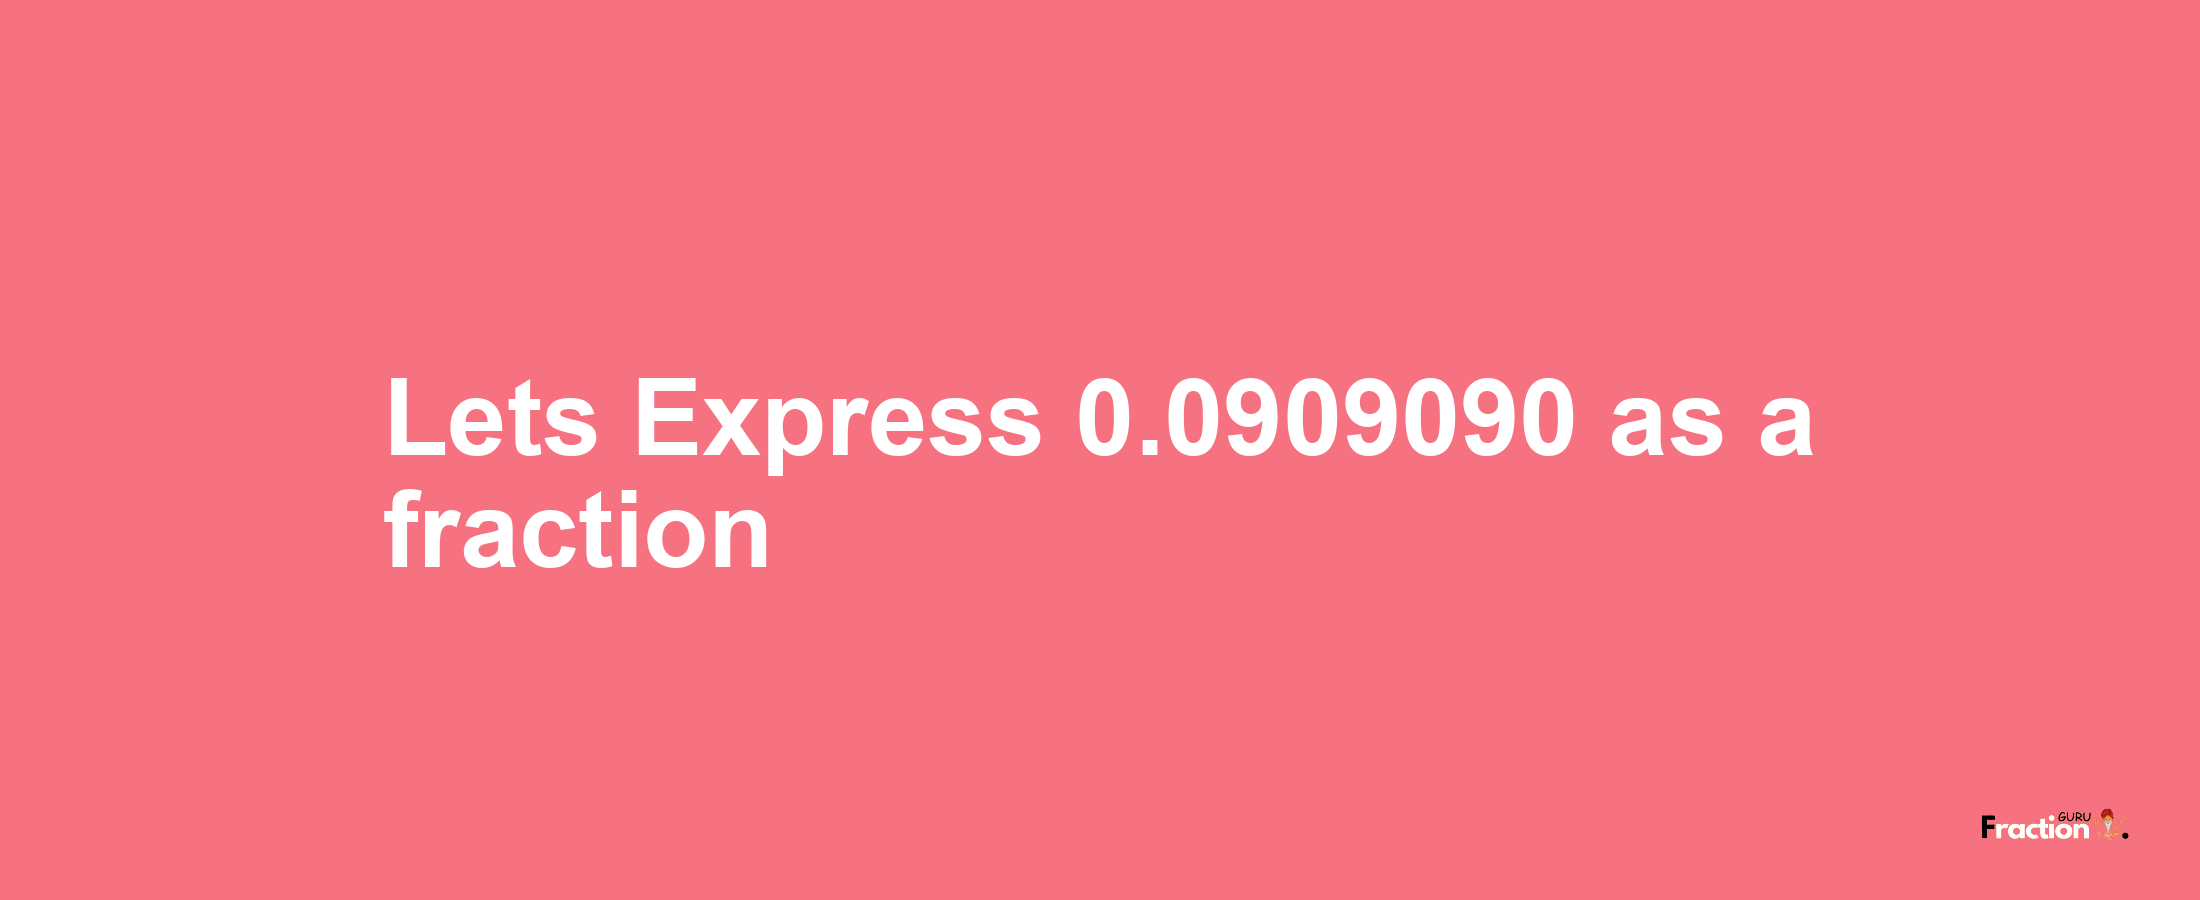 Lets Express 0.0909090 as afraction